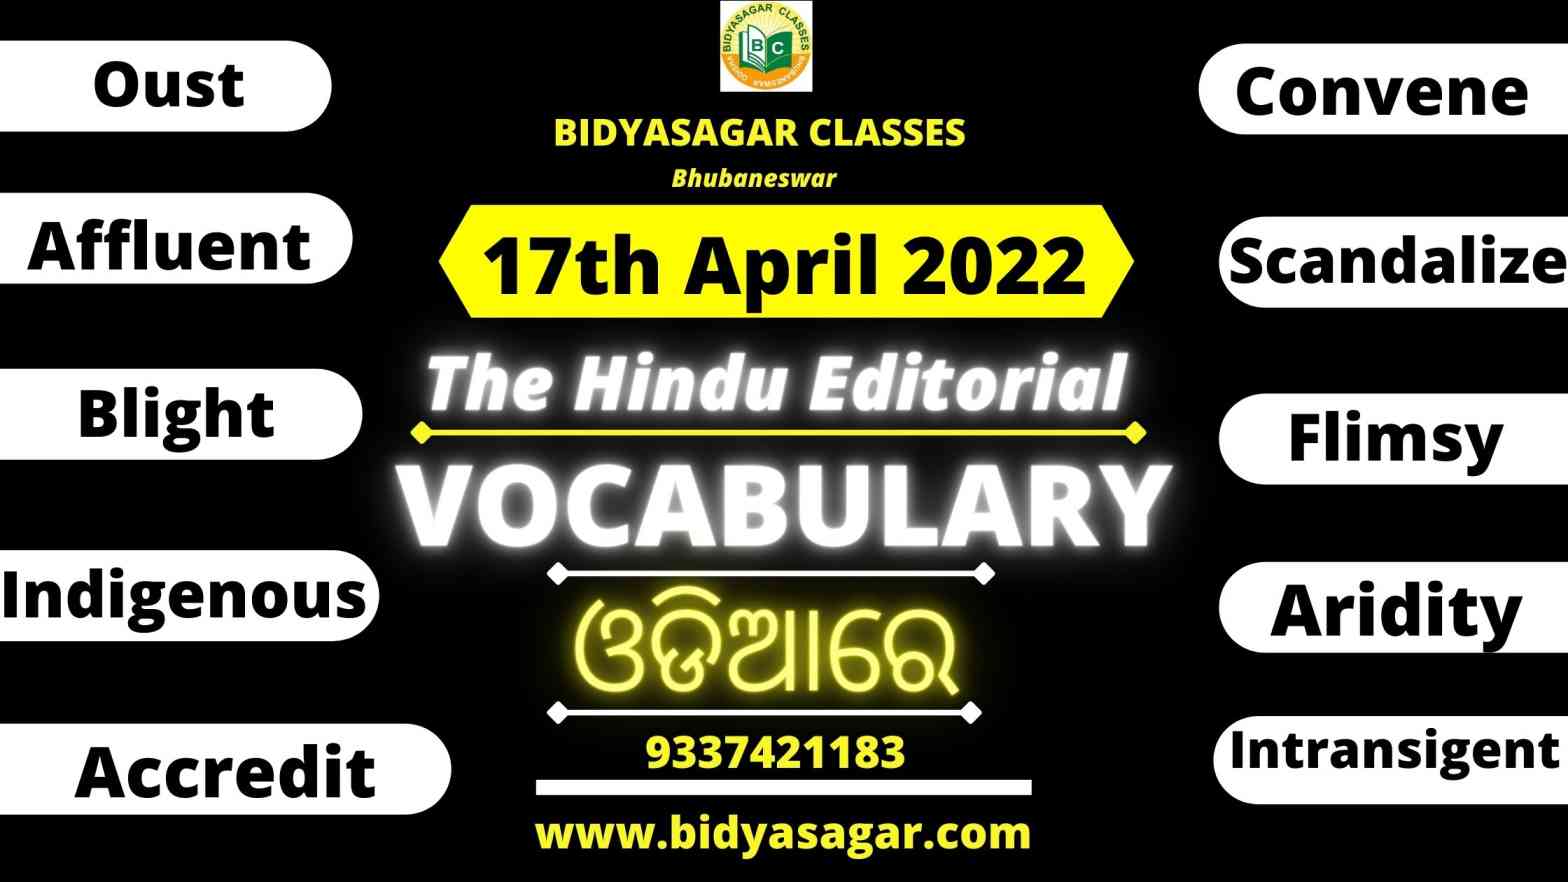 The Hindu Editorial Vocabulary of 17th April 2022